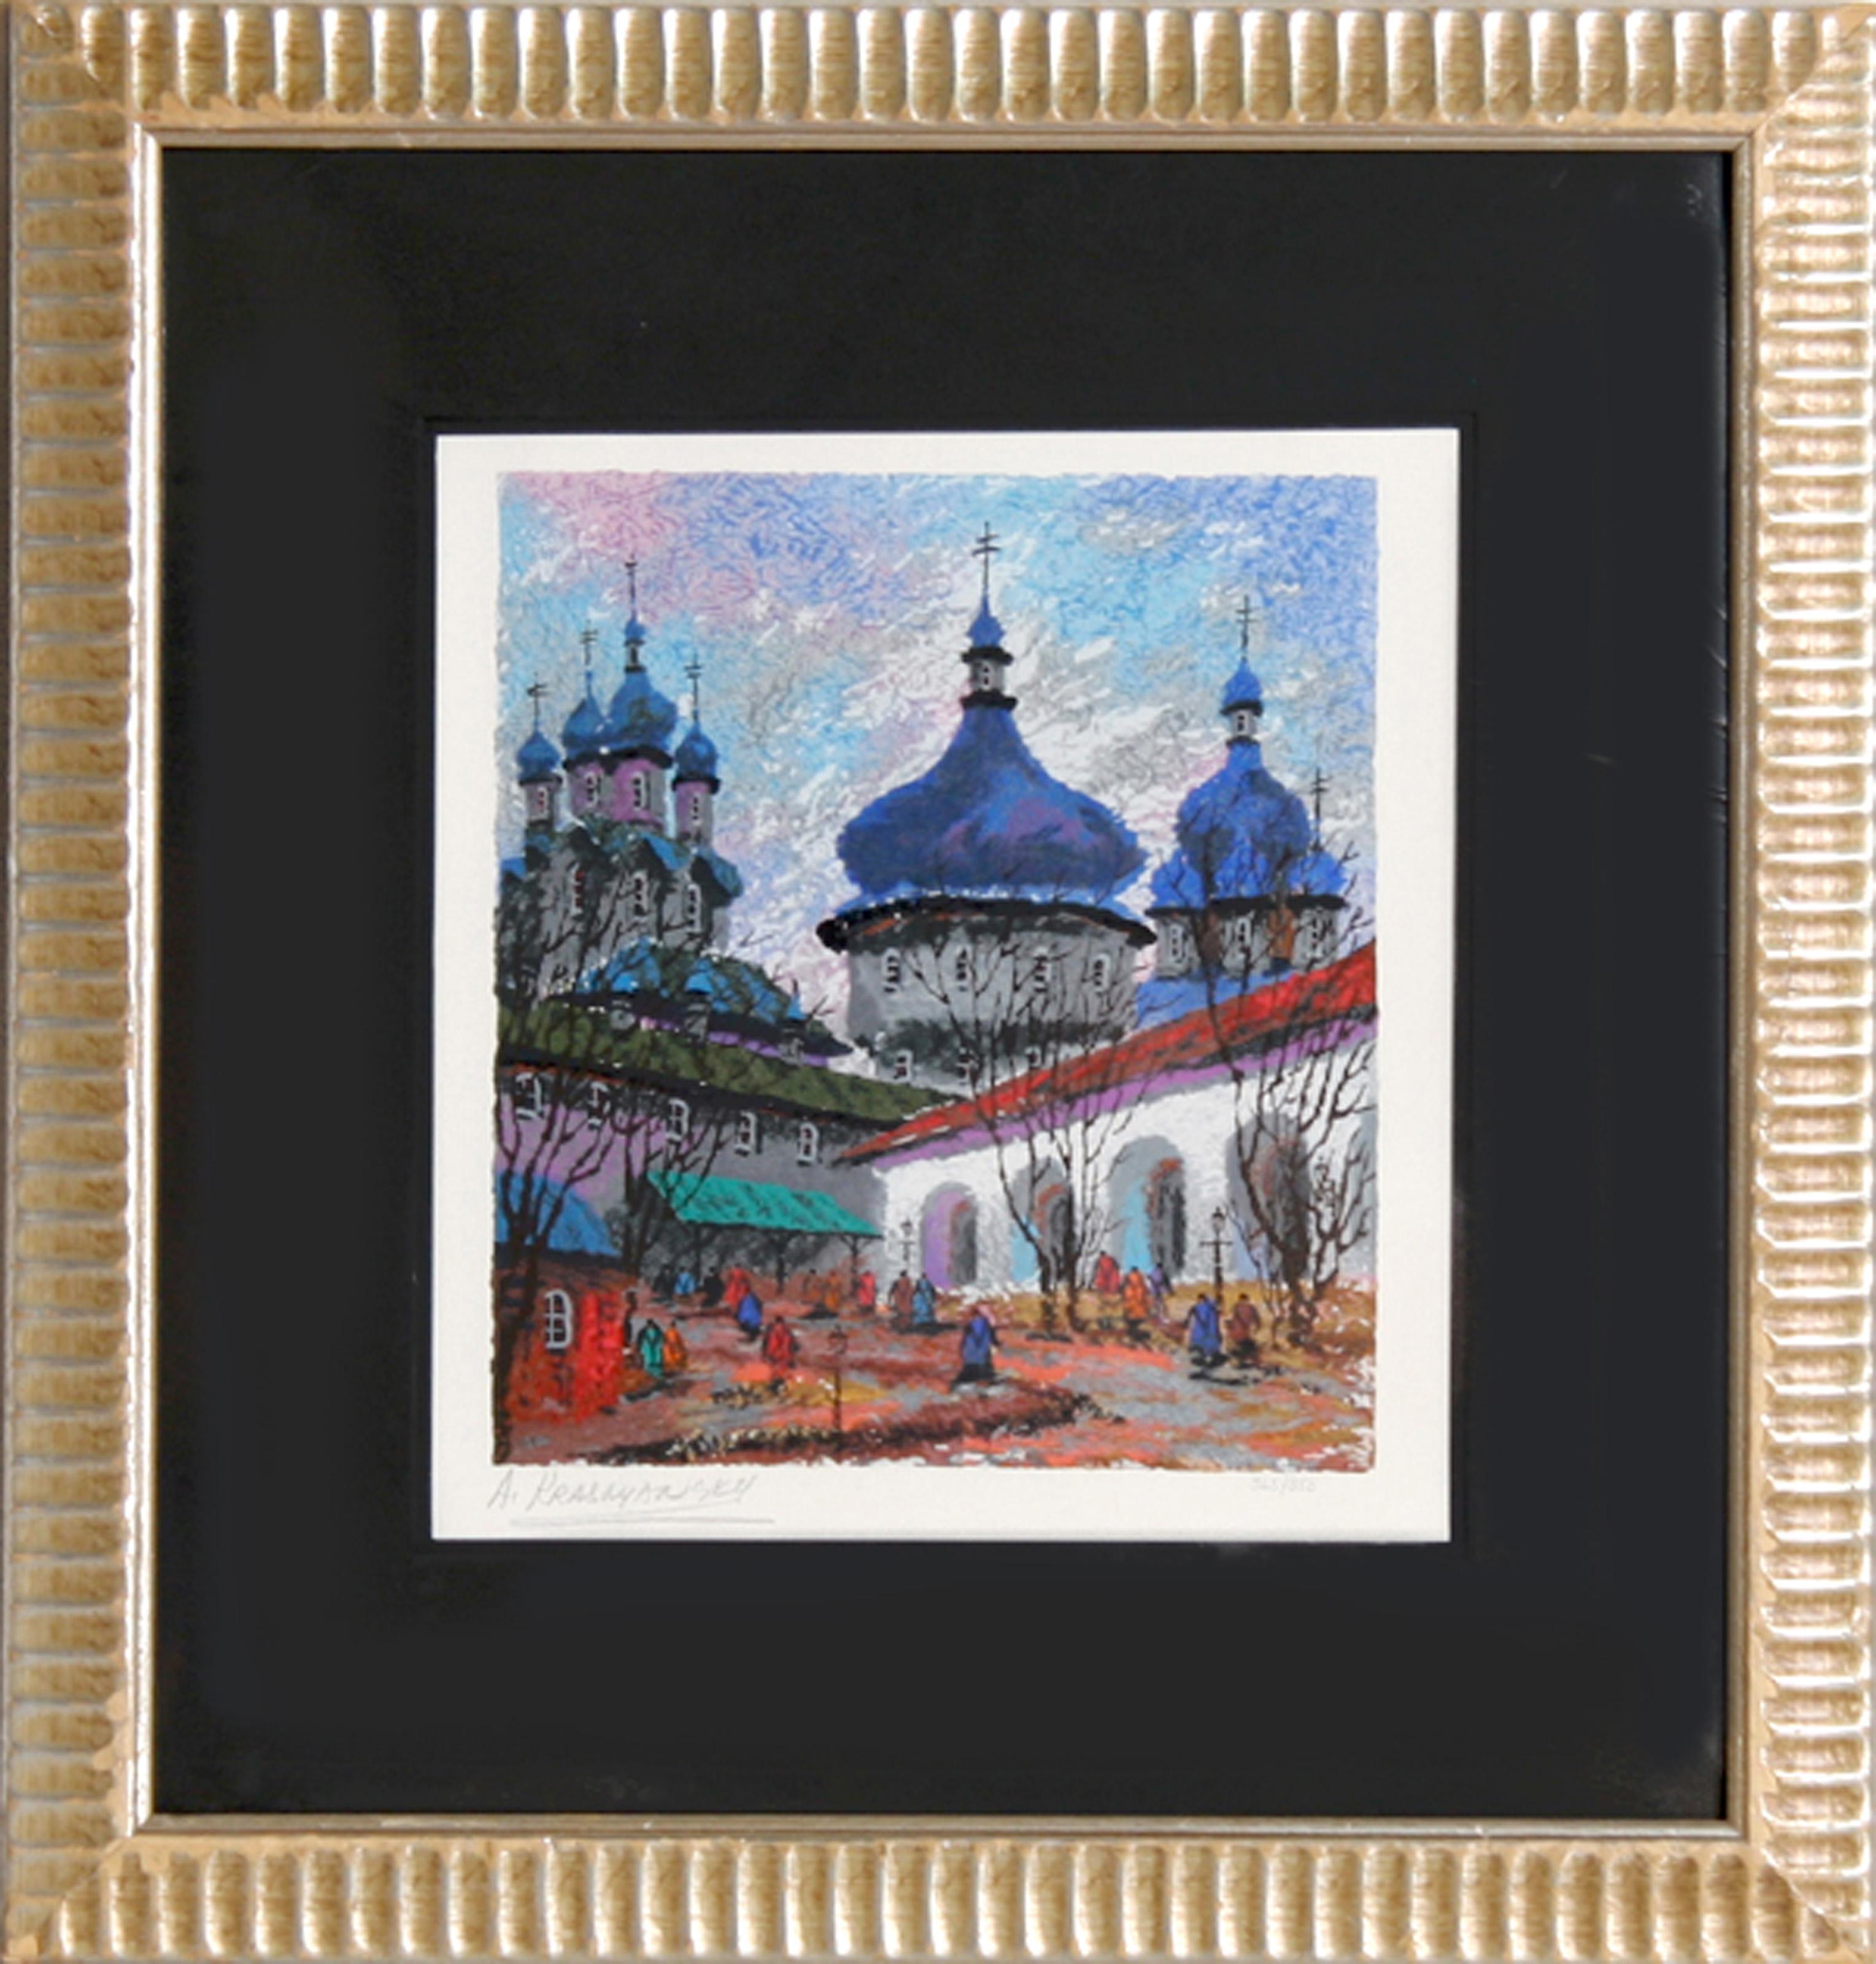 Old Towers of Rostov Kremlin, Serigraph, signed and numbered in pencil - Print by Anatole Krasnyansky